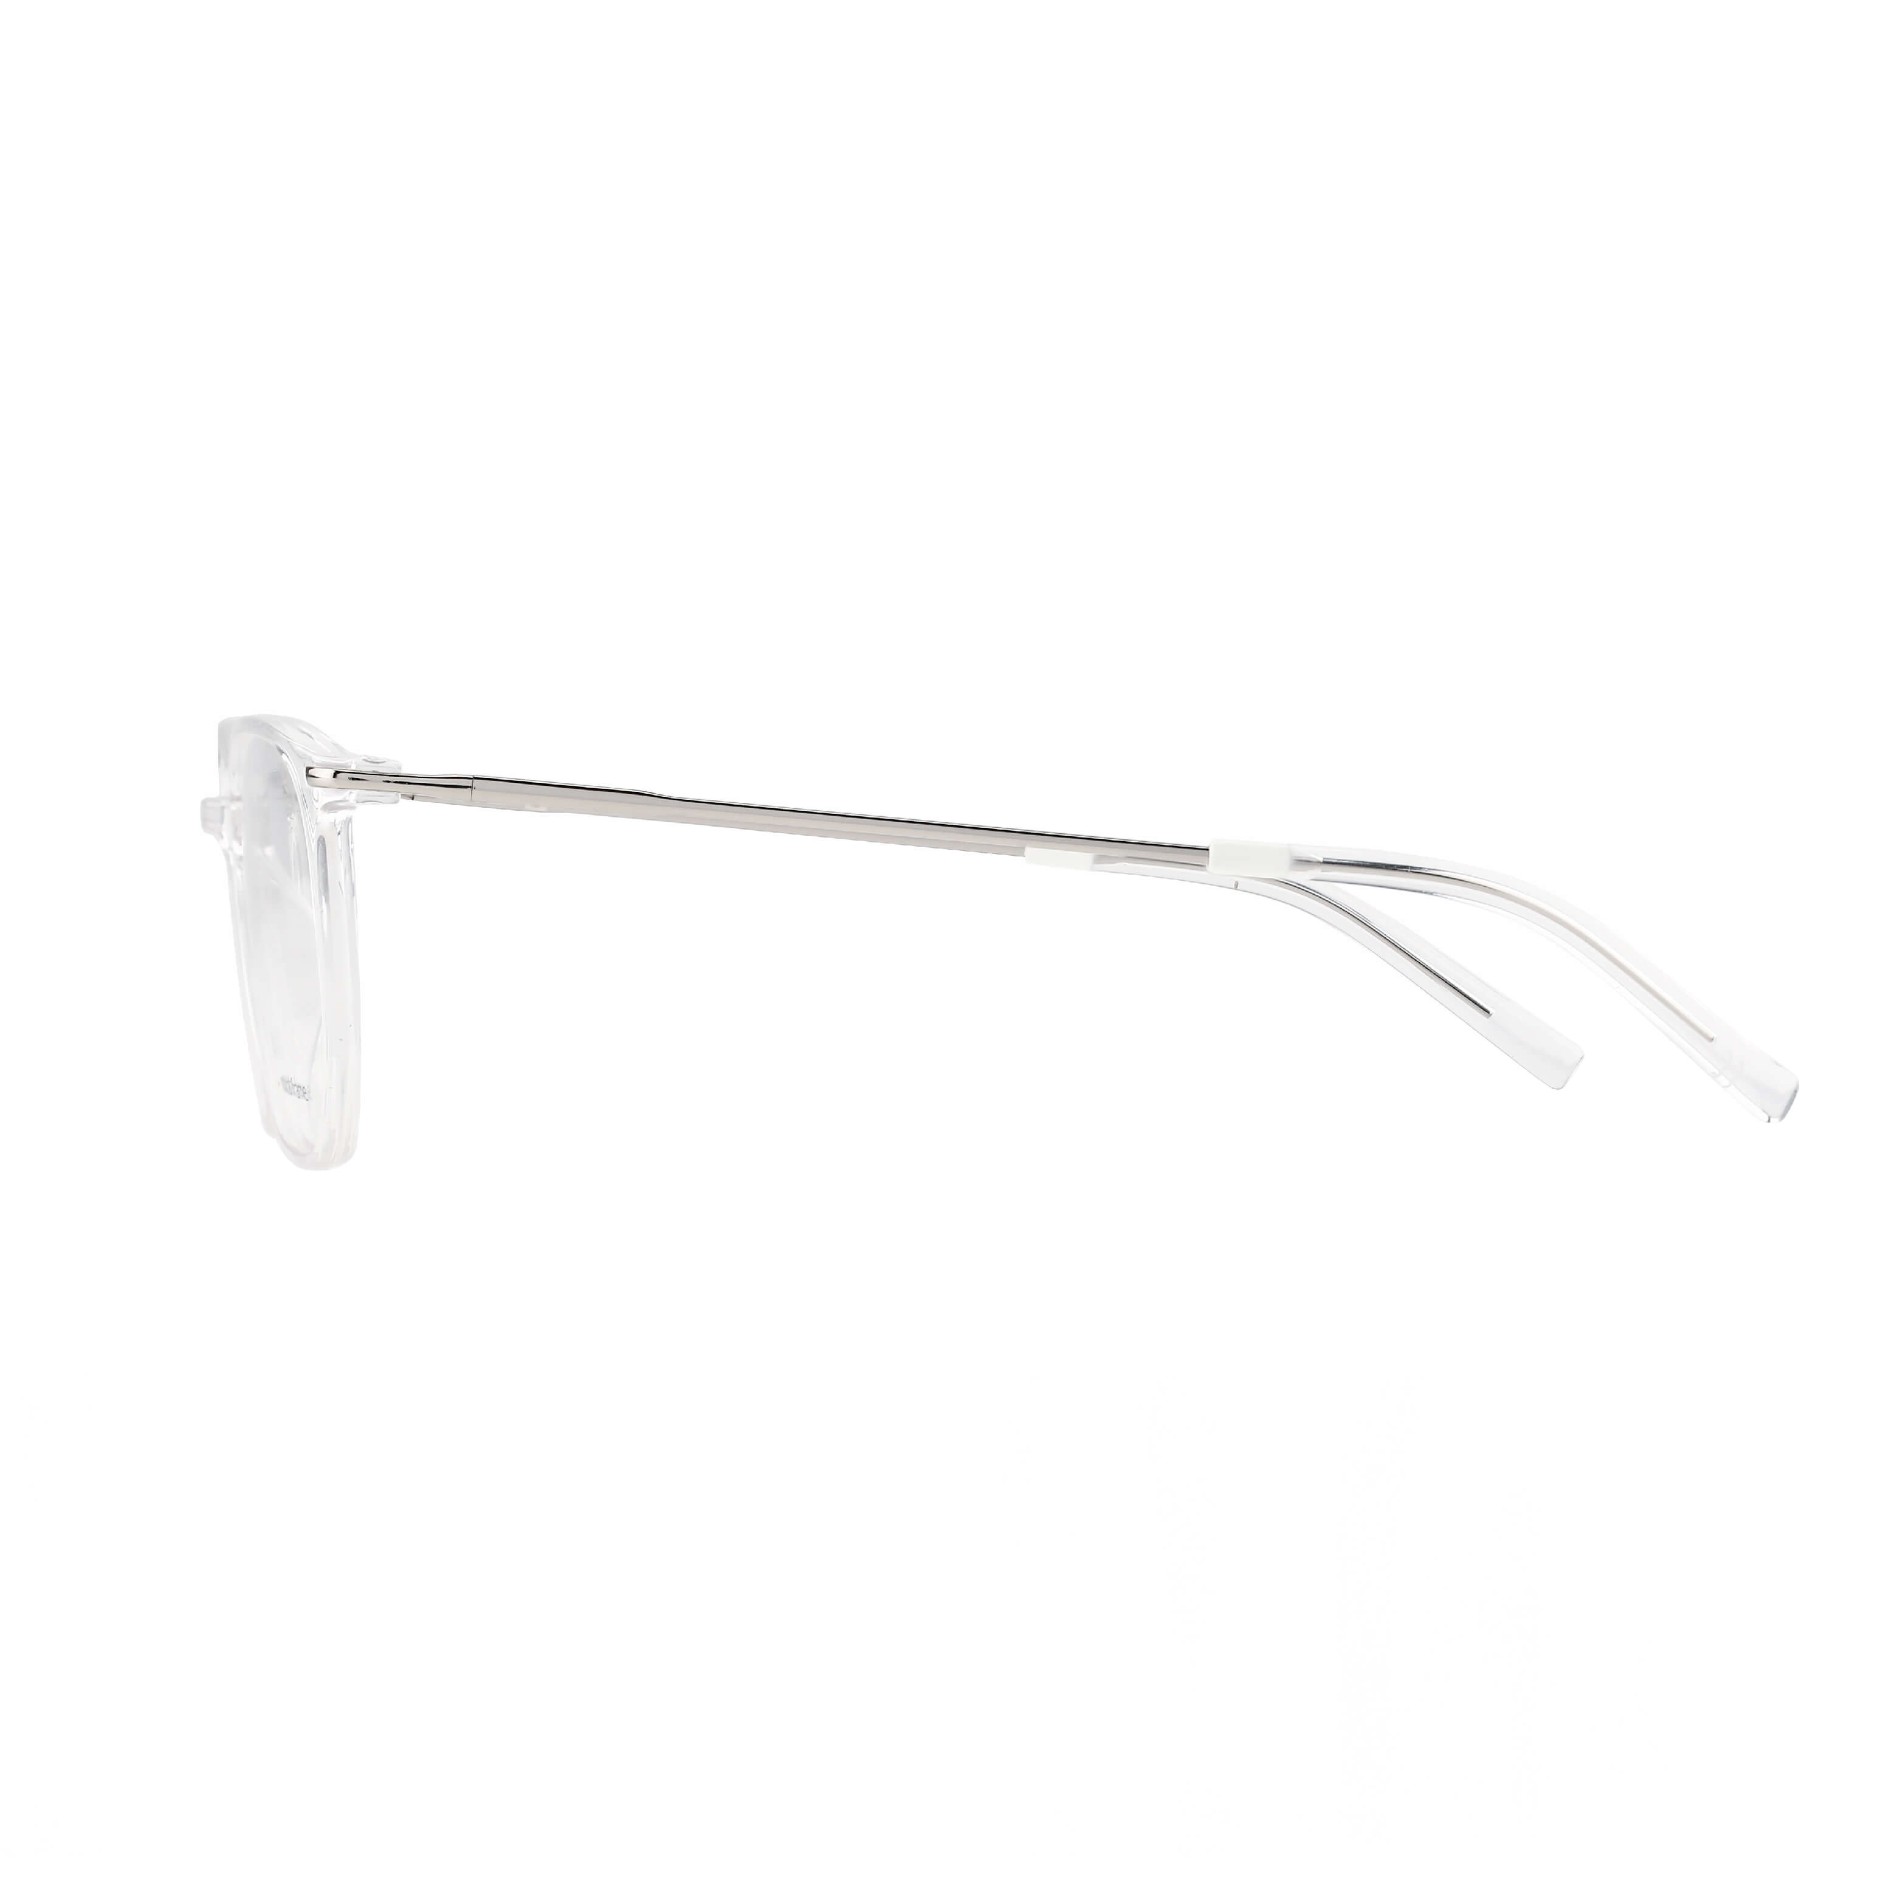 Metal Temple and TR90 Glasses Frames Blue Light Blocking Glasses Manufacturers, Metal Temple and TR90 Glasses Frames Blue Light Blocking Glasses Factory, Supply Metal Temple and TR90 Glasses Frames Blue Light Blocking Glasses